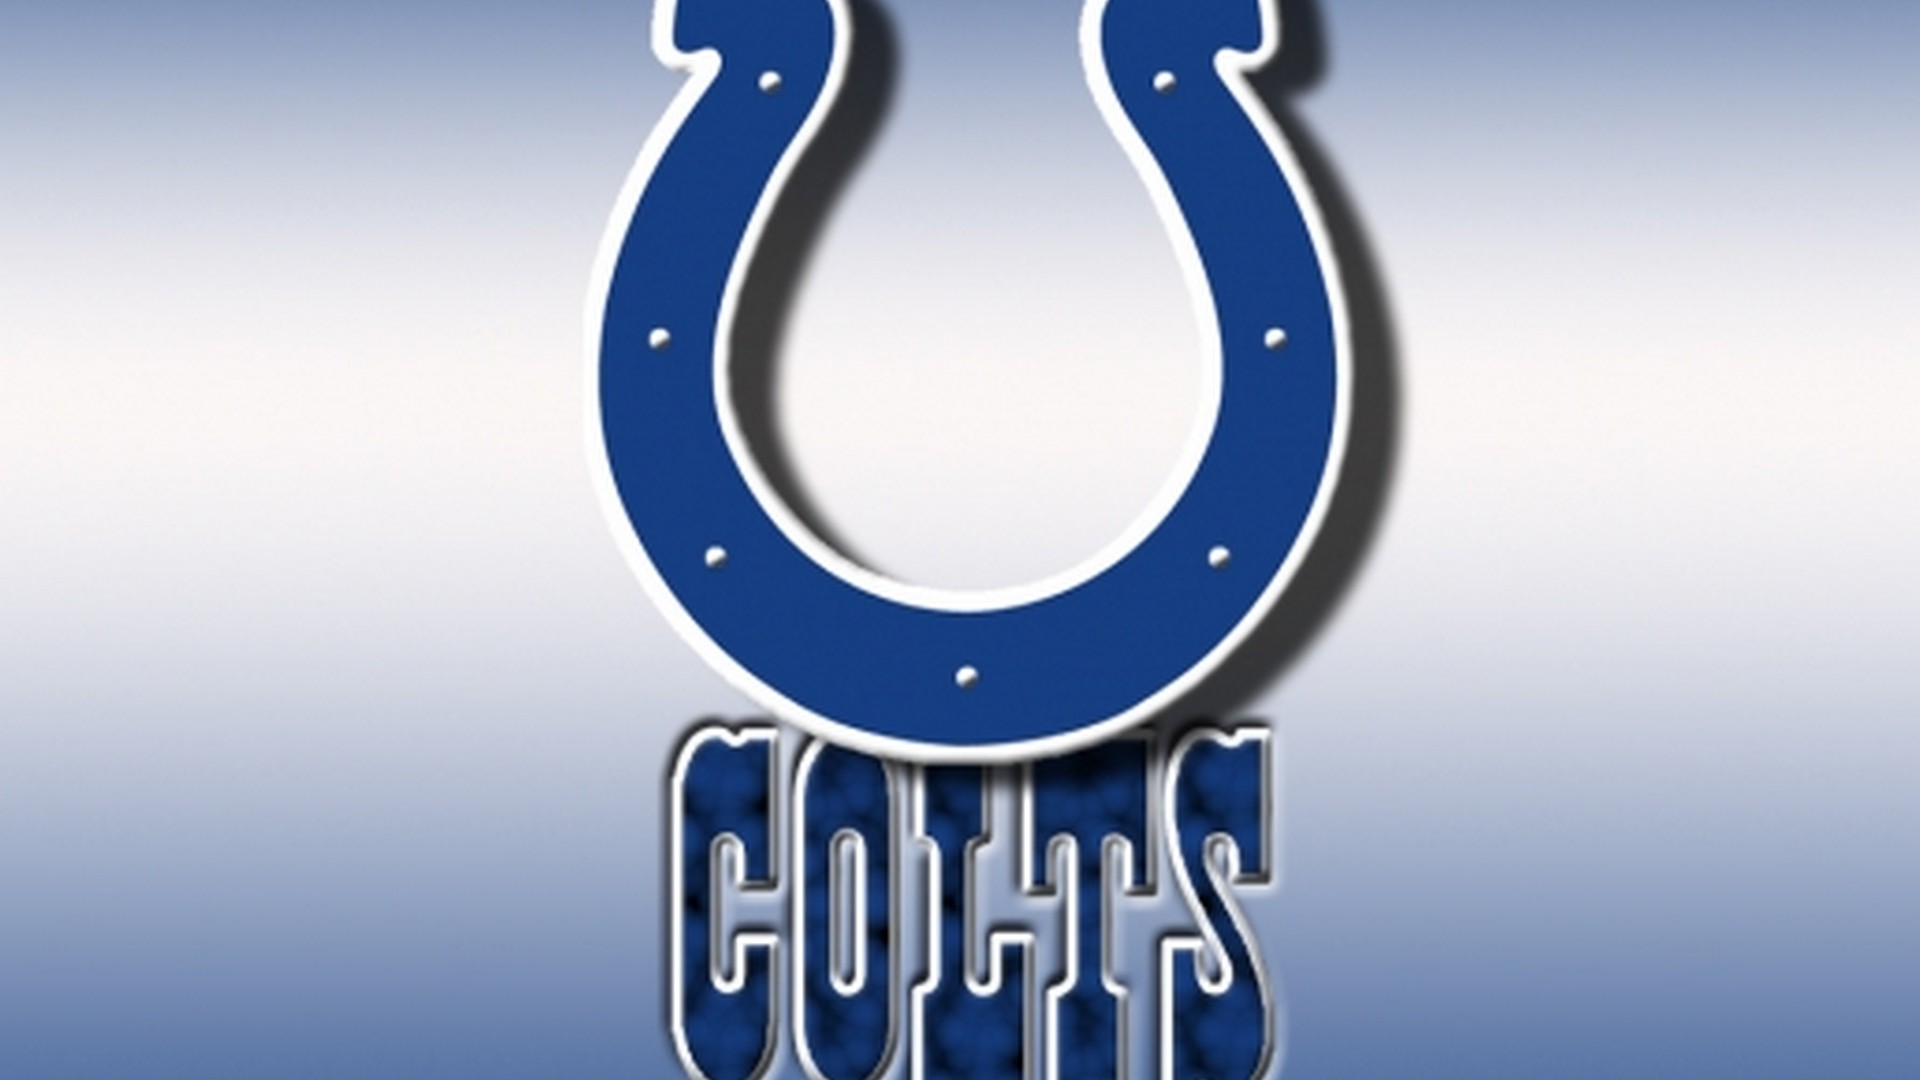 Windows Wallpaper Indianapolis Colts NFL With Resolution 1920X1080 pixel. You can make this wallpaper for your Mac or Windows Desktop Background, iPhone, Android or Tablet and another Smartphone device for free